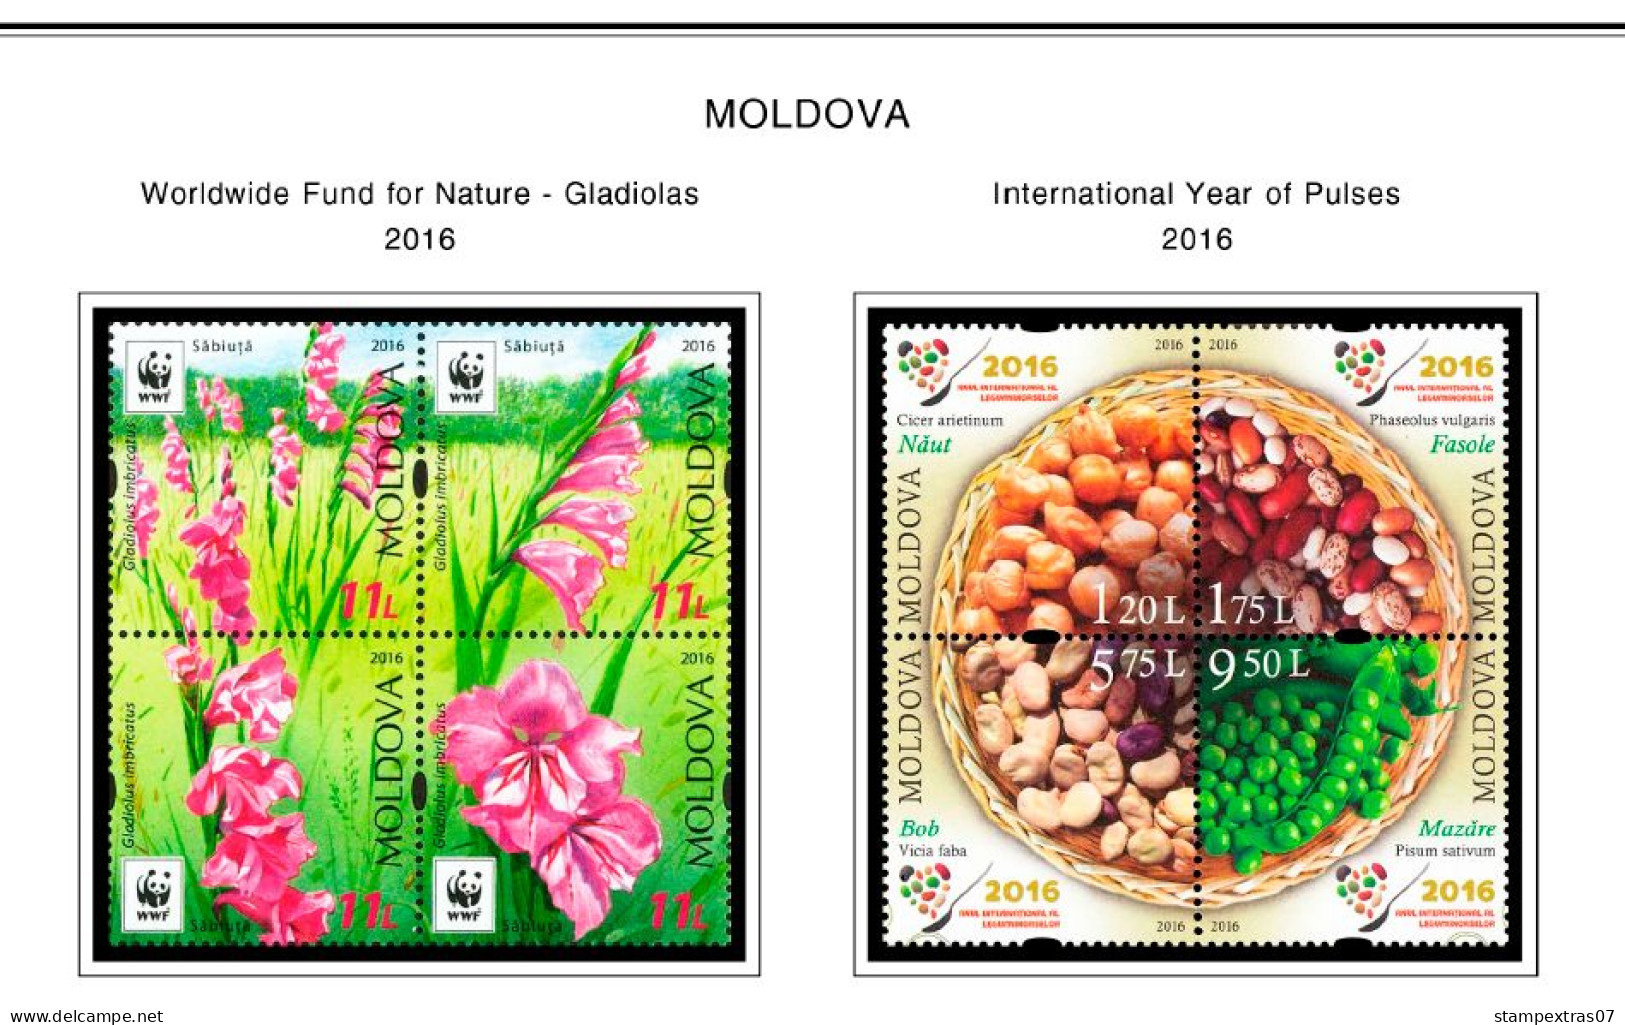 COLOR PRINTED MOLDOVA 2011-2020 STAMP ALBUM PAGES (52 illustrated pages) >> FEUILLES ALBUM